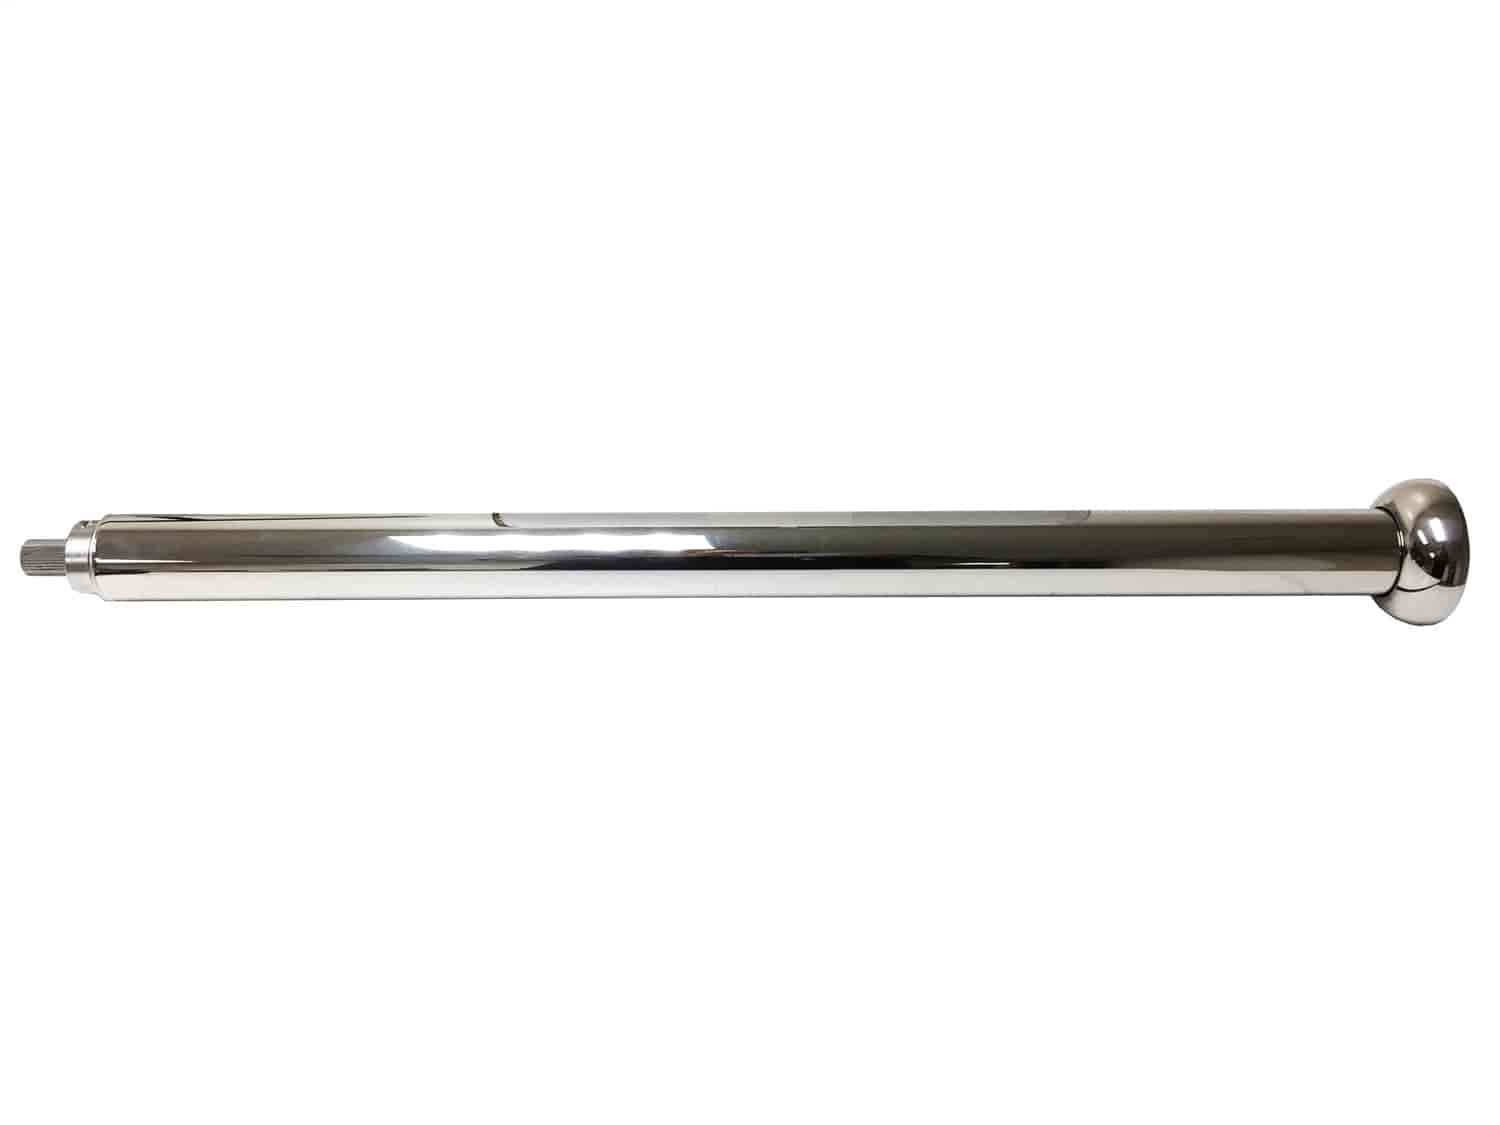 Hot Rod Steering Column 26 in. Length, Polished